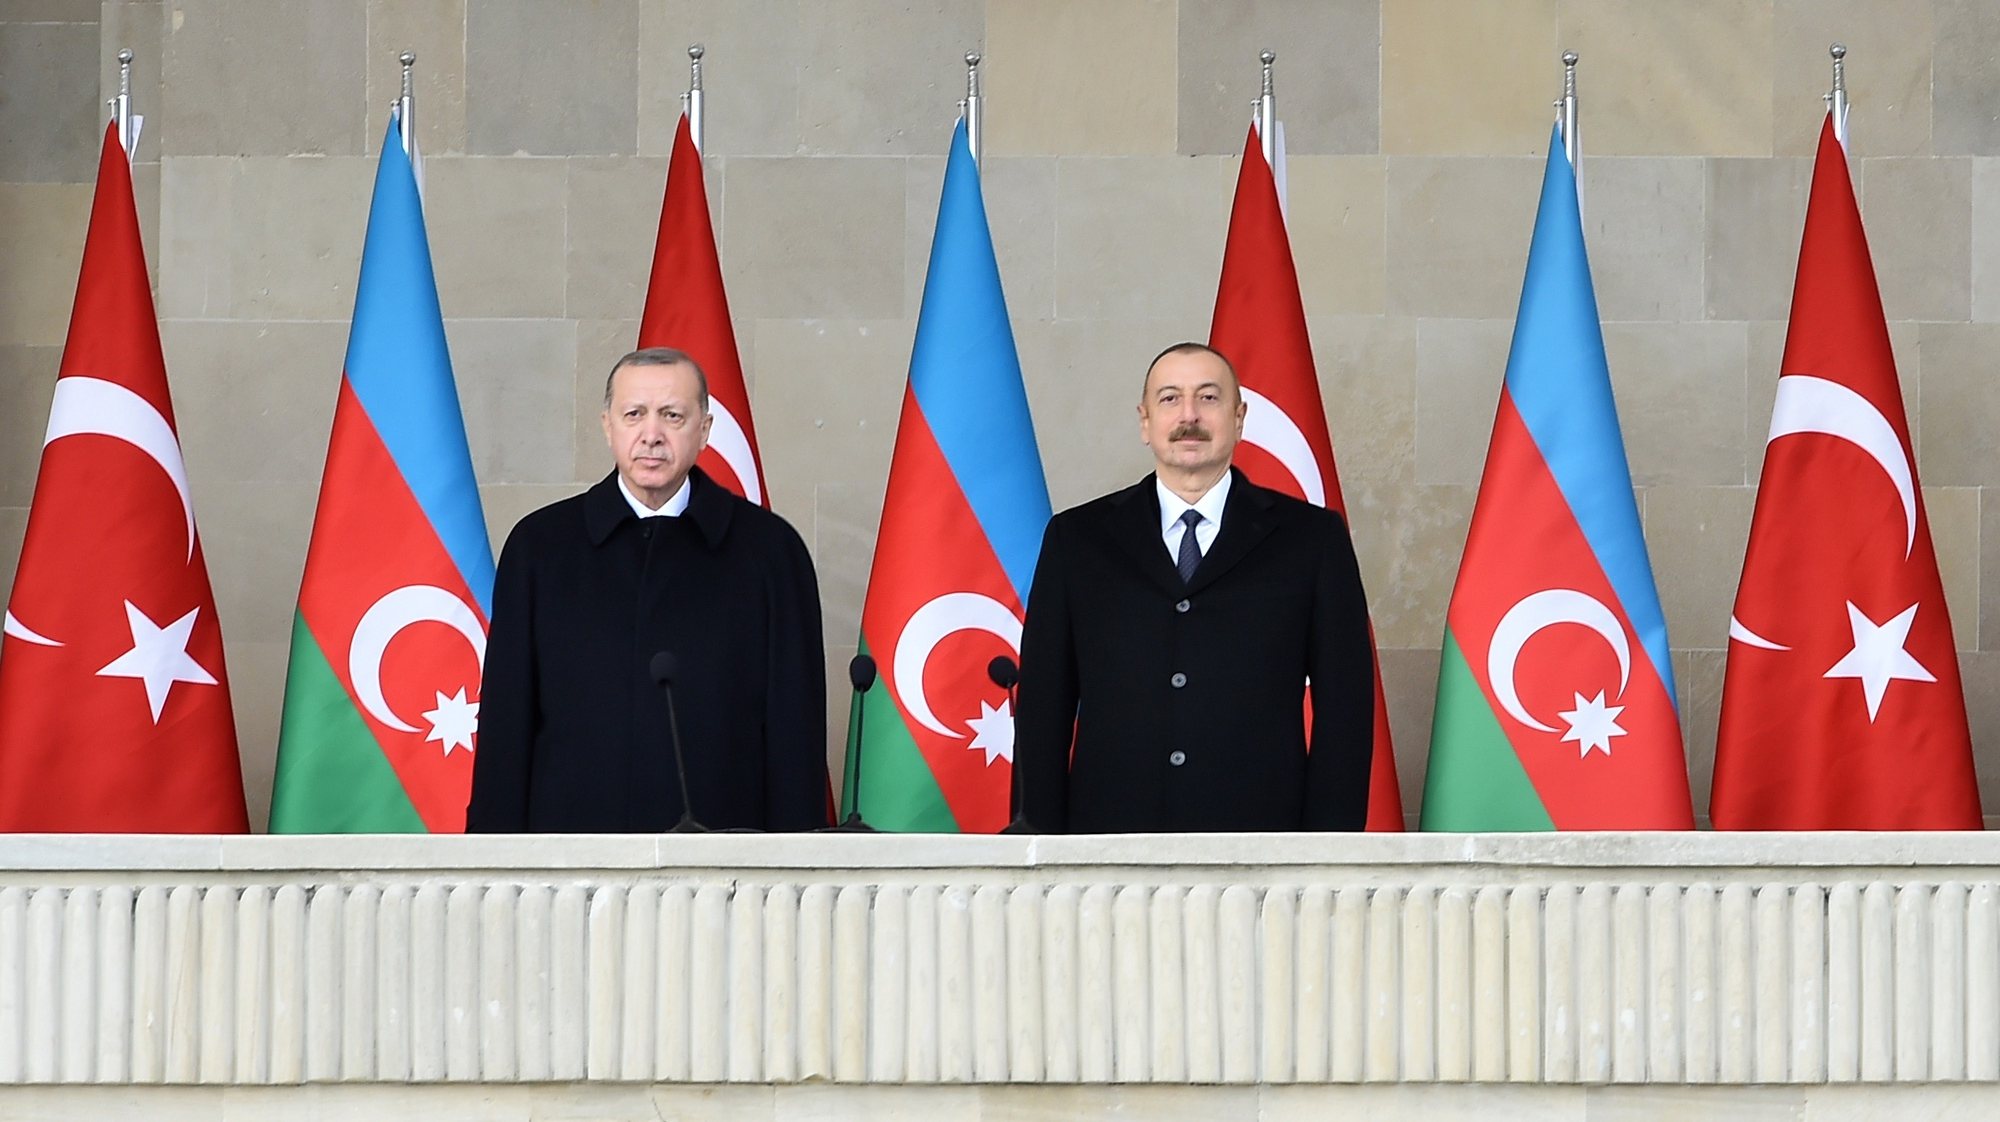 epa08874748 Azerbaijani President Ilham Aliyev (R) and Turkish President Recep Tayyip Erdogan (L) attend a military parade dedicated to the victory in the Nagorno-Karabakh armed conflict, in Baku, Azerbaijan, 10 December 2020. The simmering territorial conflict between Azerbaijan and Armenia over Nagorno-Karabakh territory erupted into a war between the two countries on 27 September 2020 along the contact line of the self-proclaimed Nagorno-Karabakh Republic (also known as Artsakh). On 09 November 2020 Presidents of Azerbaijan and Russia and Armenian Prime Minister signed a joint statement announcing a complete ceasefire and halt of all military operations in the Nagorno-Karabakh conflict zone, and return of the Aghdam, Kalbajar and Lachin districts to Azerbaijan.  EPA/POMAN ISMAYILOV